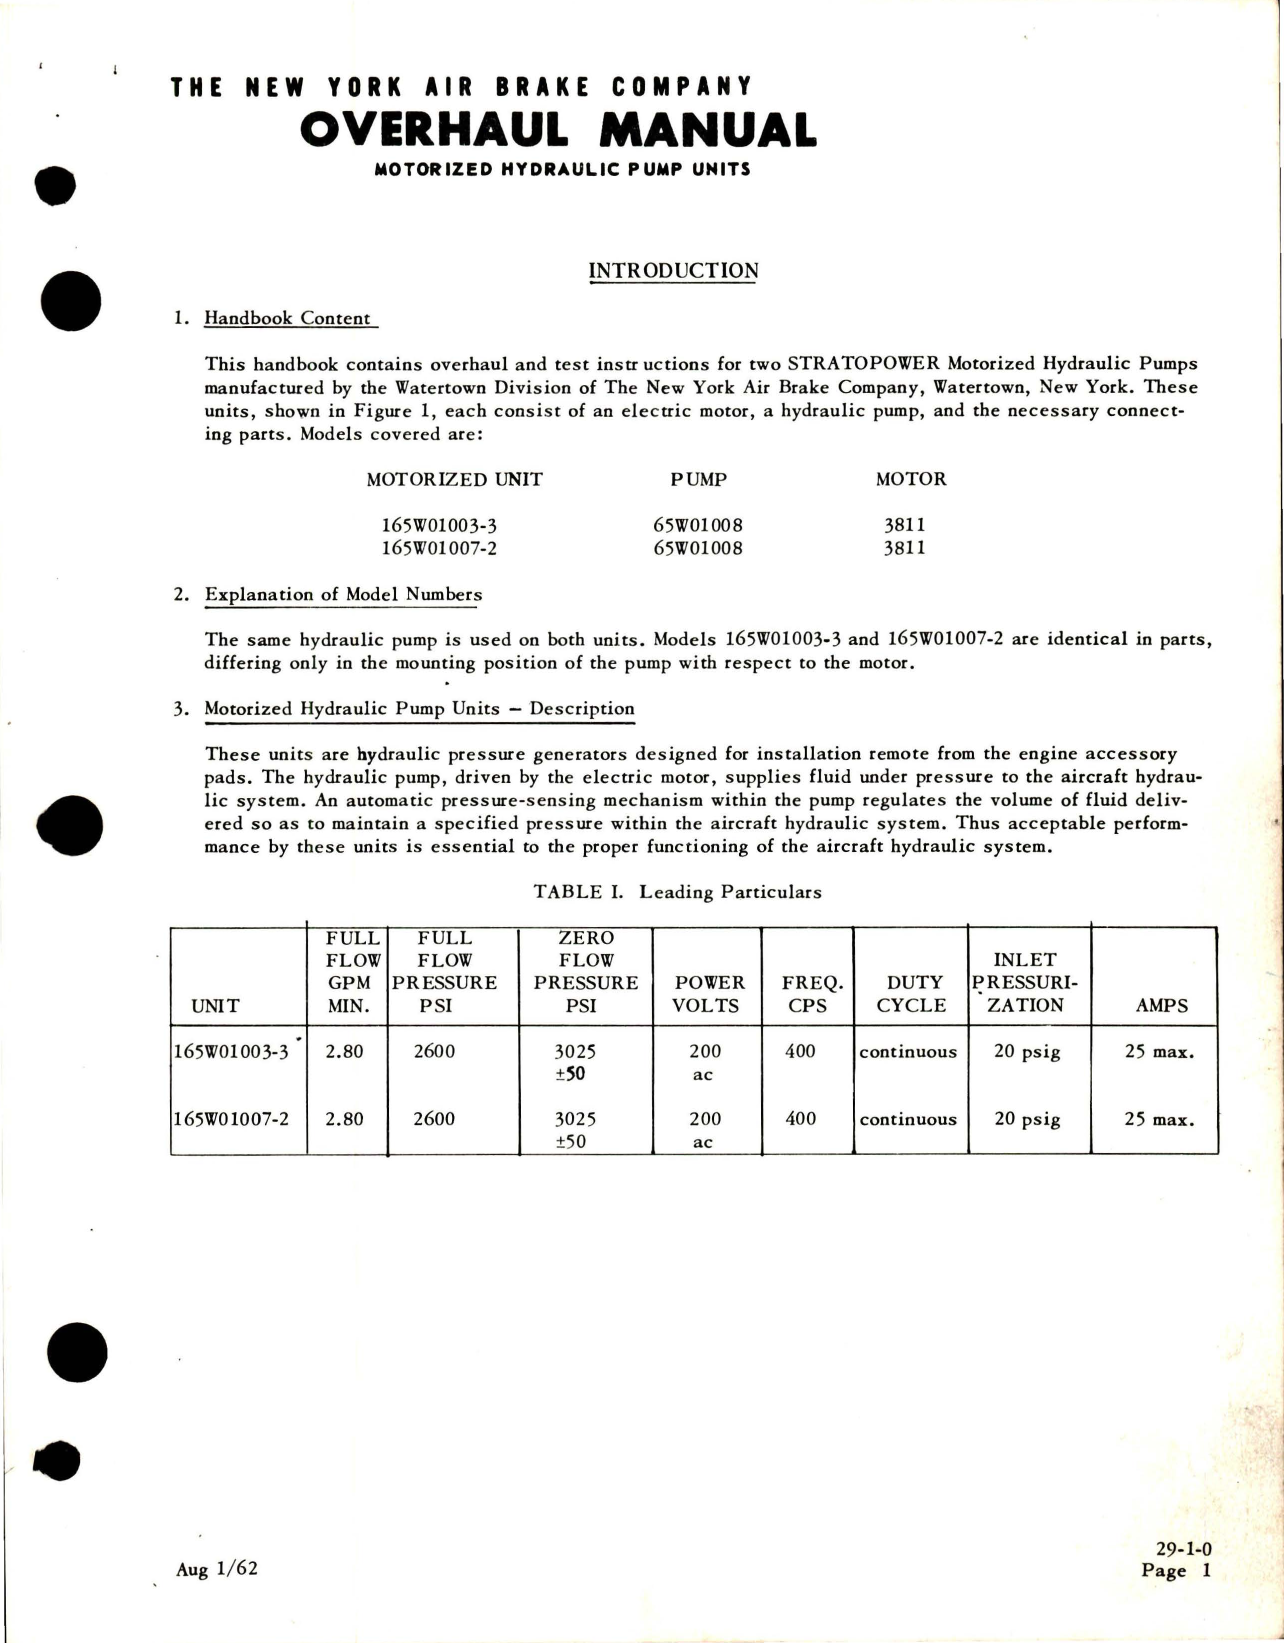 Sample page 5 from AirCorps Library document: Overhaul Manual for Stratopower Motorized Hydraulic Pumps - Models 165W01003-3 and 165W01007-2 